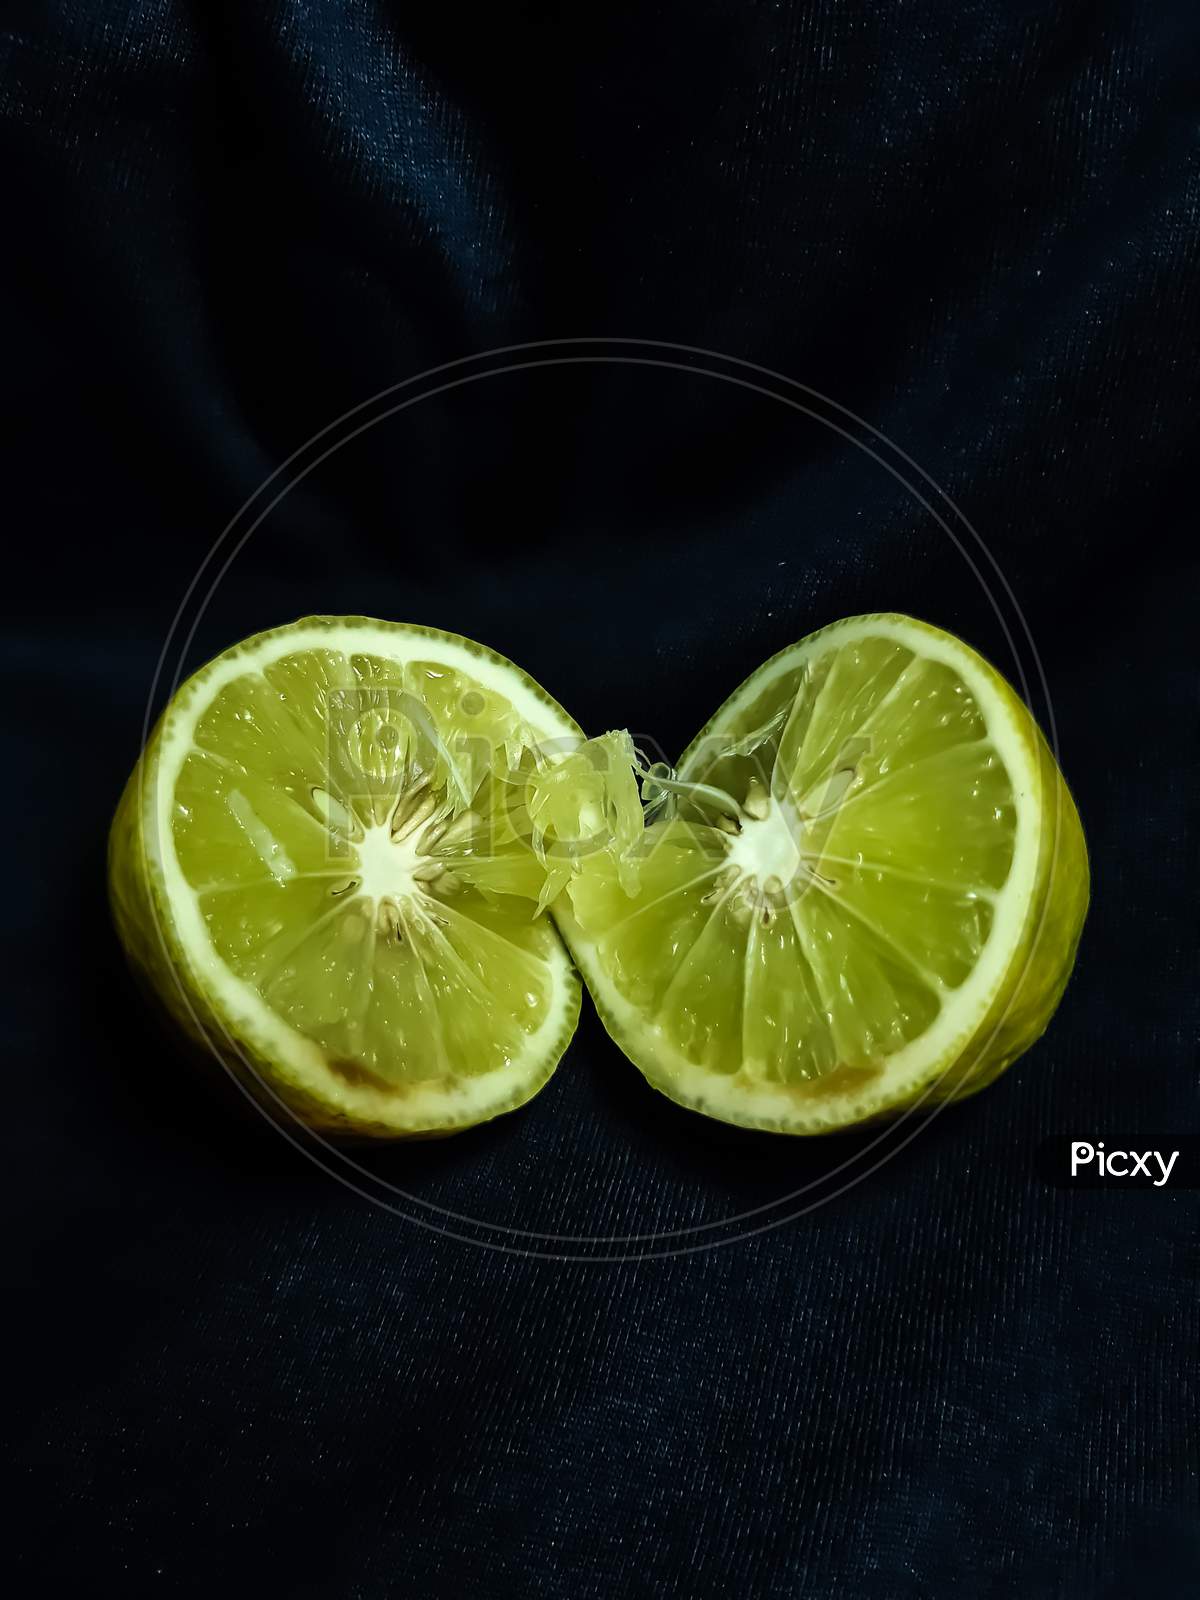 A Lemon Is Cut In The Middle And It Is On A Black Background